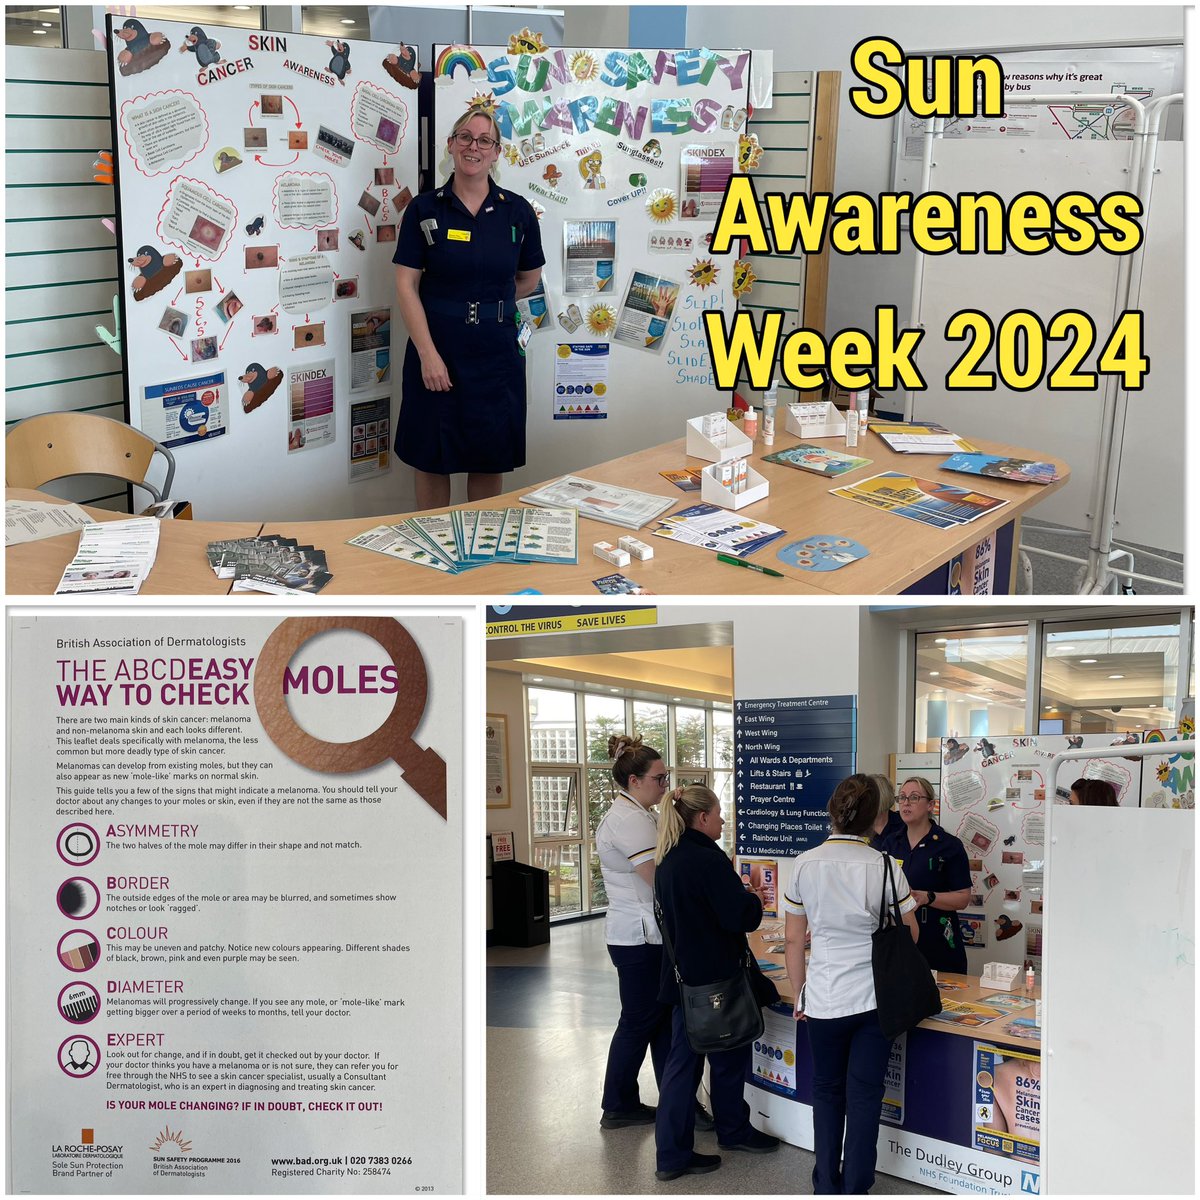 Dudley’s Skin Cancer CNS Sharron is down in the health hub today promoting Sun Awareness Week☀️ This vital campaign reinforces the need for sun protection and how to check for signs of skin cancer Samples of sunscreen available🧴 Pop down & see her 🙂 @DudleyGroupNHS